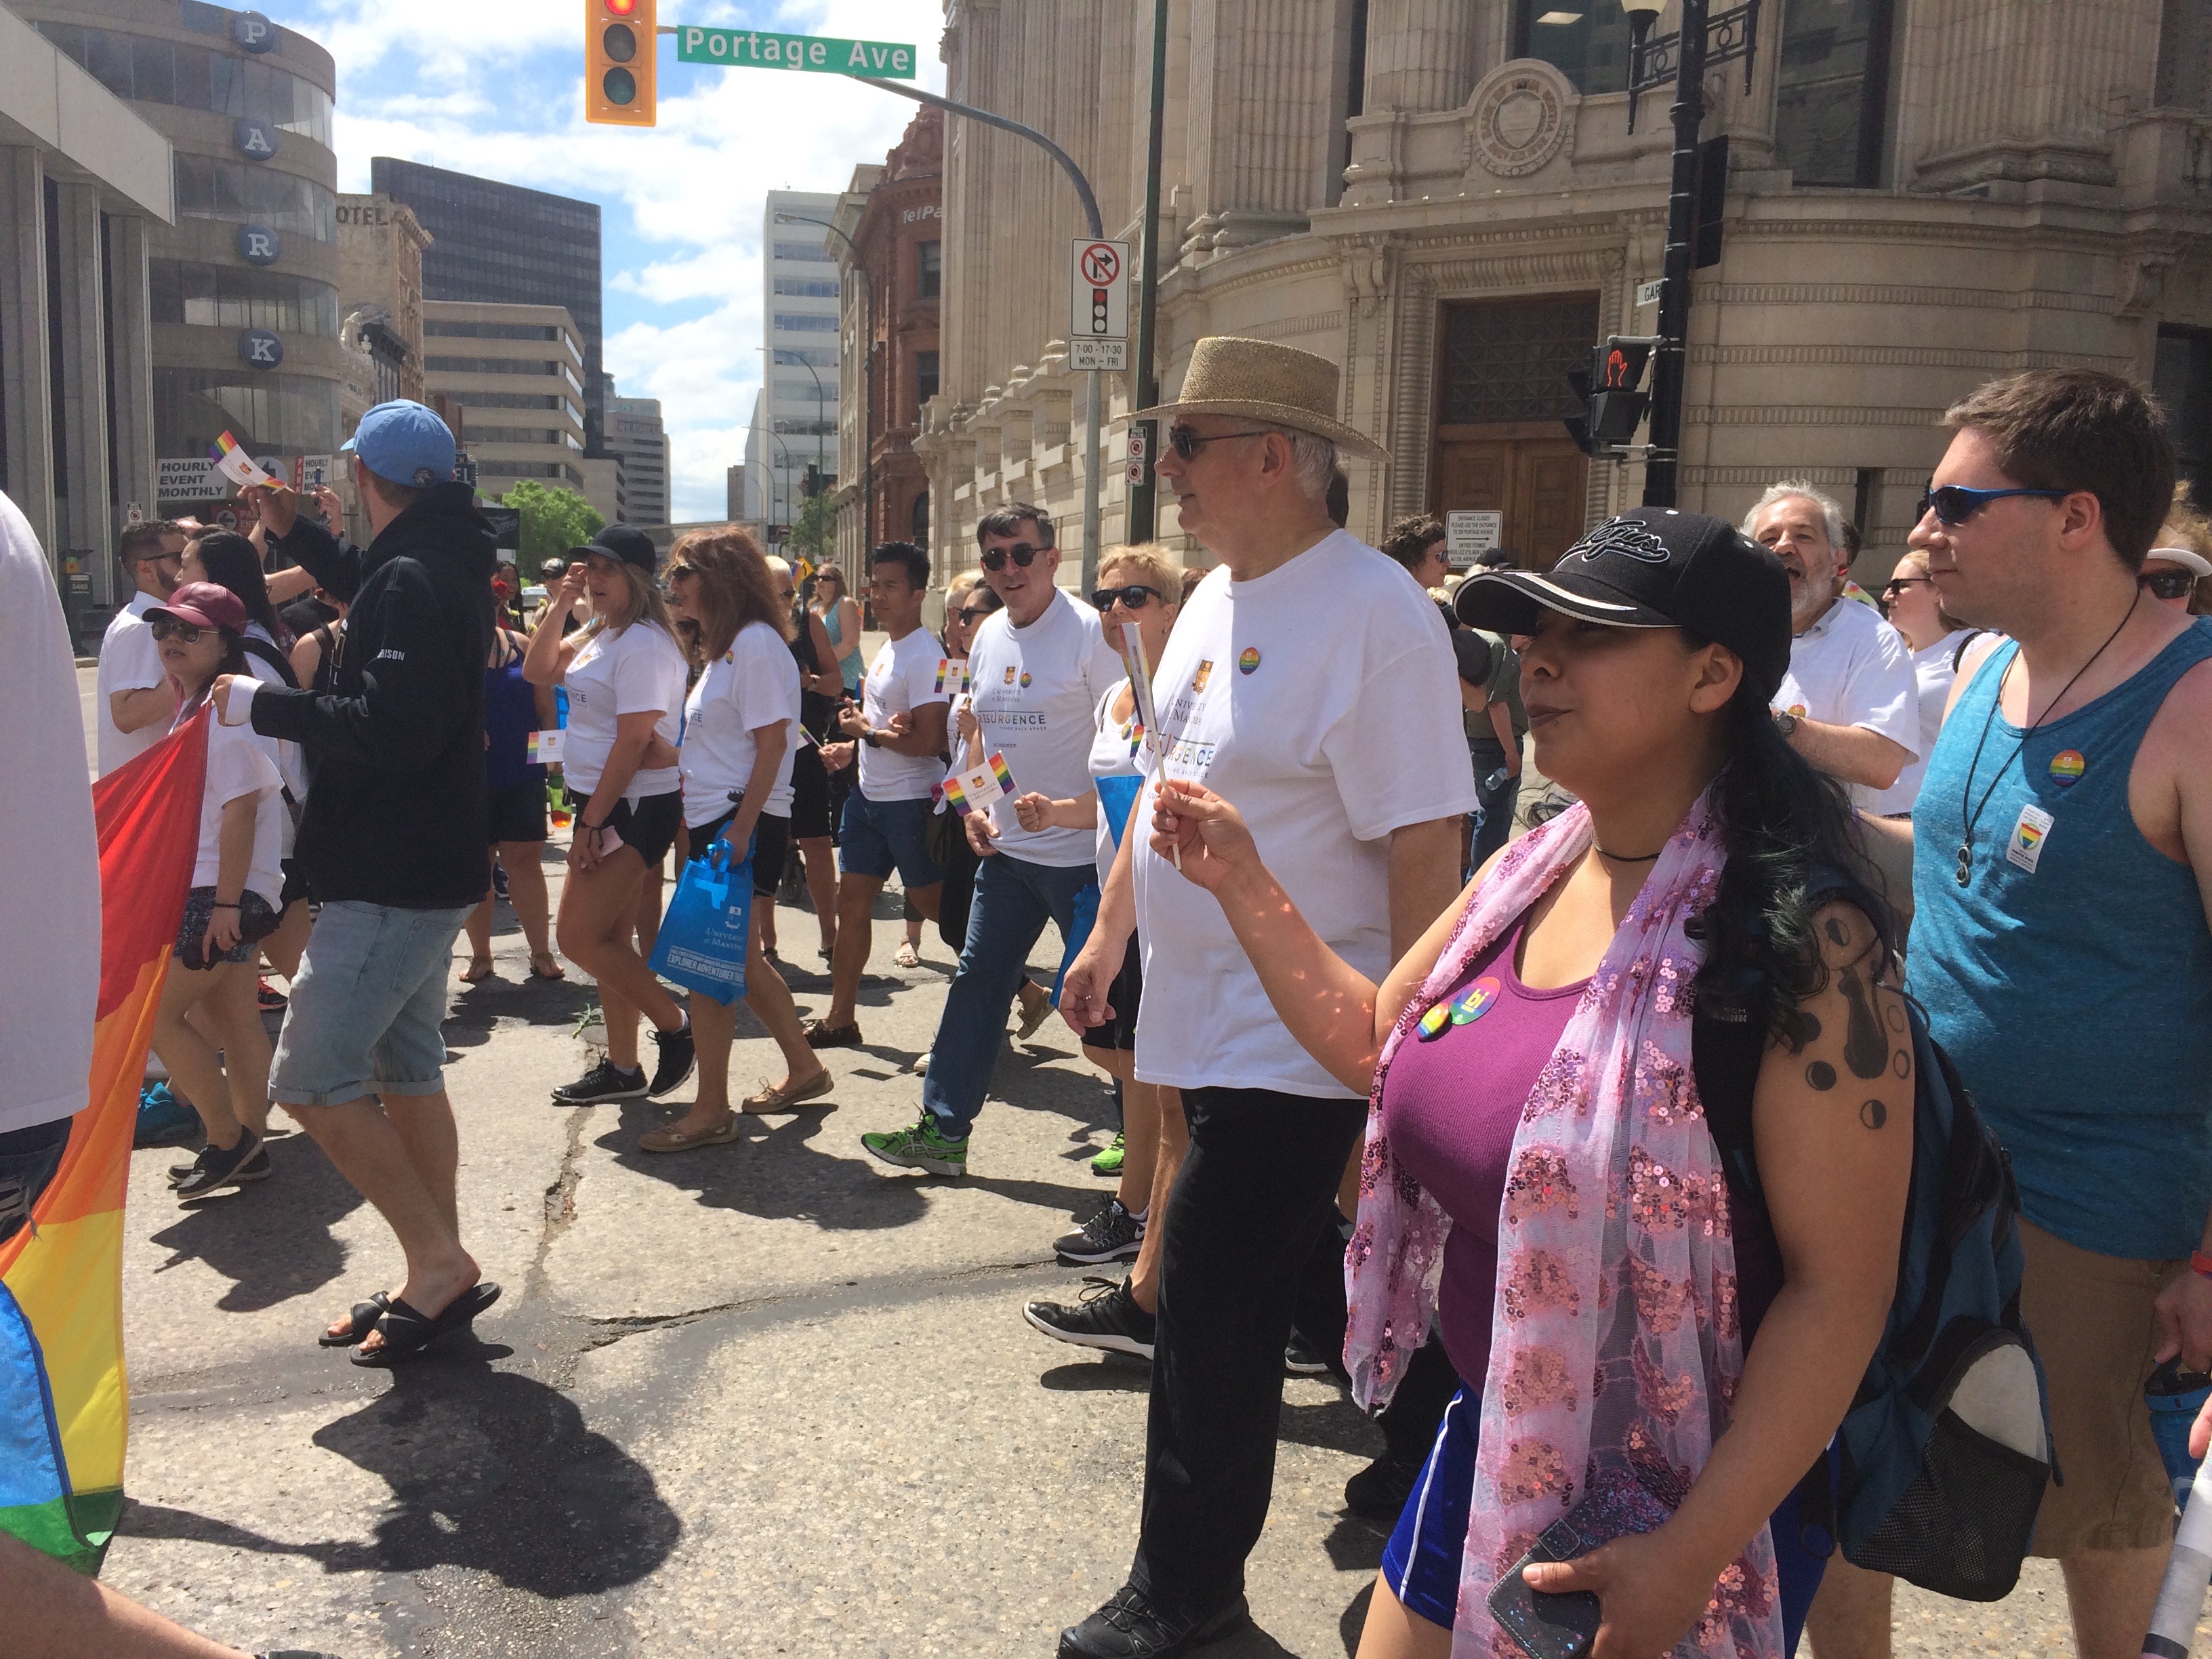 Dr. David T. Barnard, President and Vice-Chancellor, walks with U of M in the Pride parade on June 4.